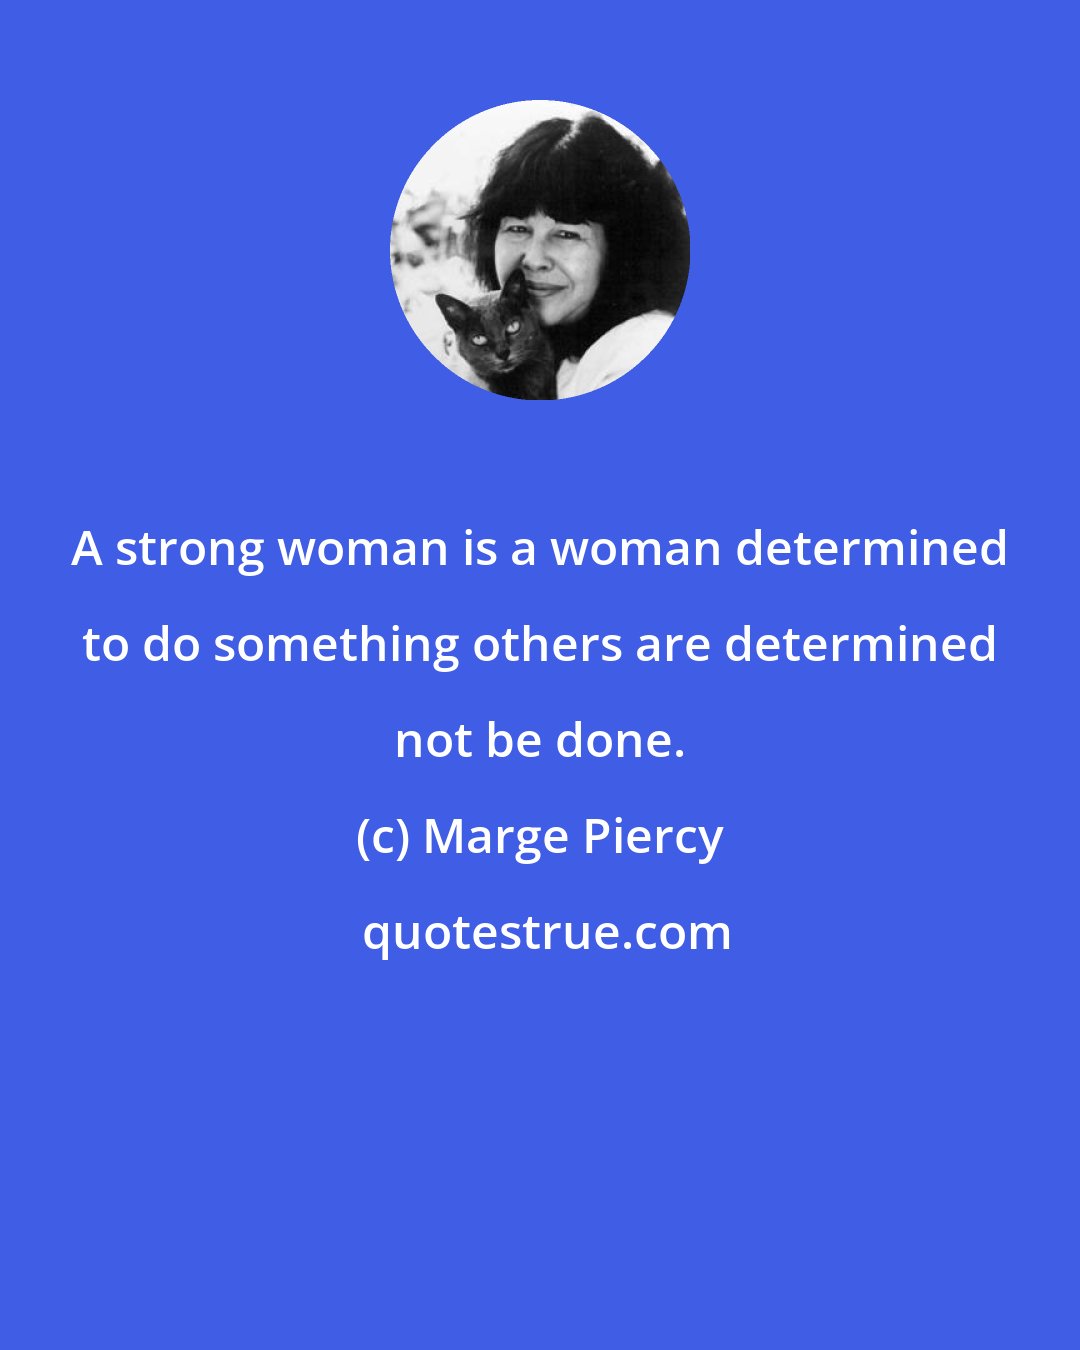 Marge Piercy: A strong woman is a woman determined to do something others are determined not be done.